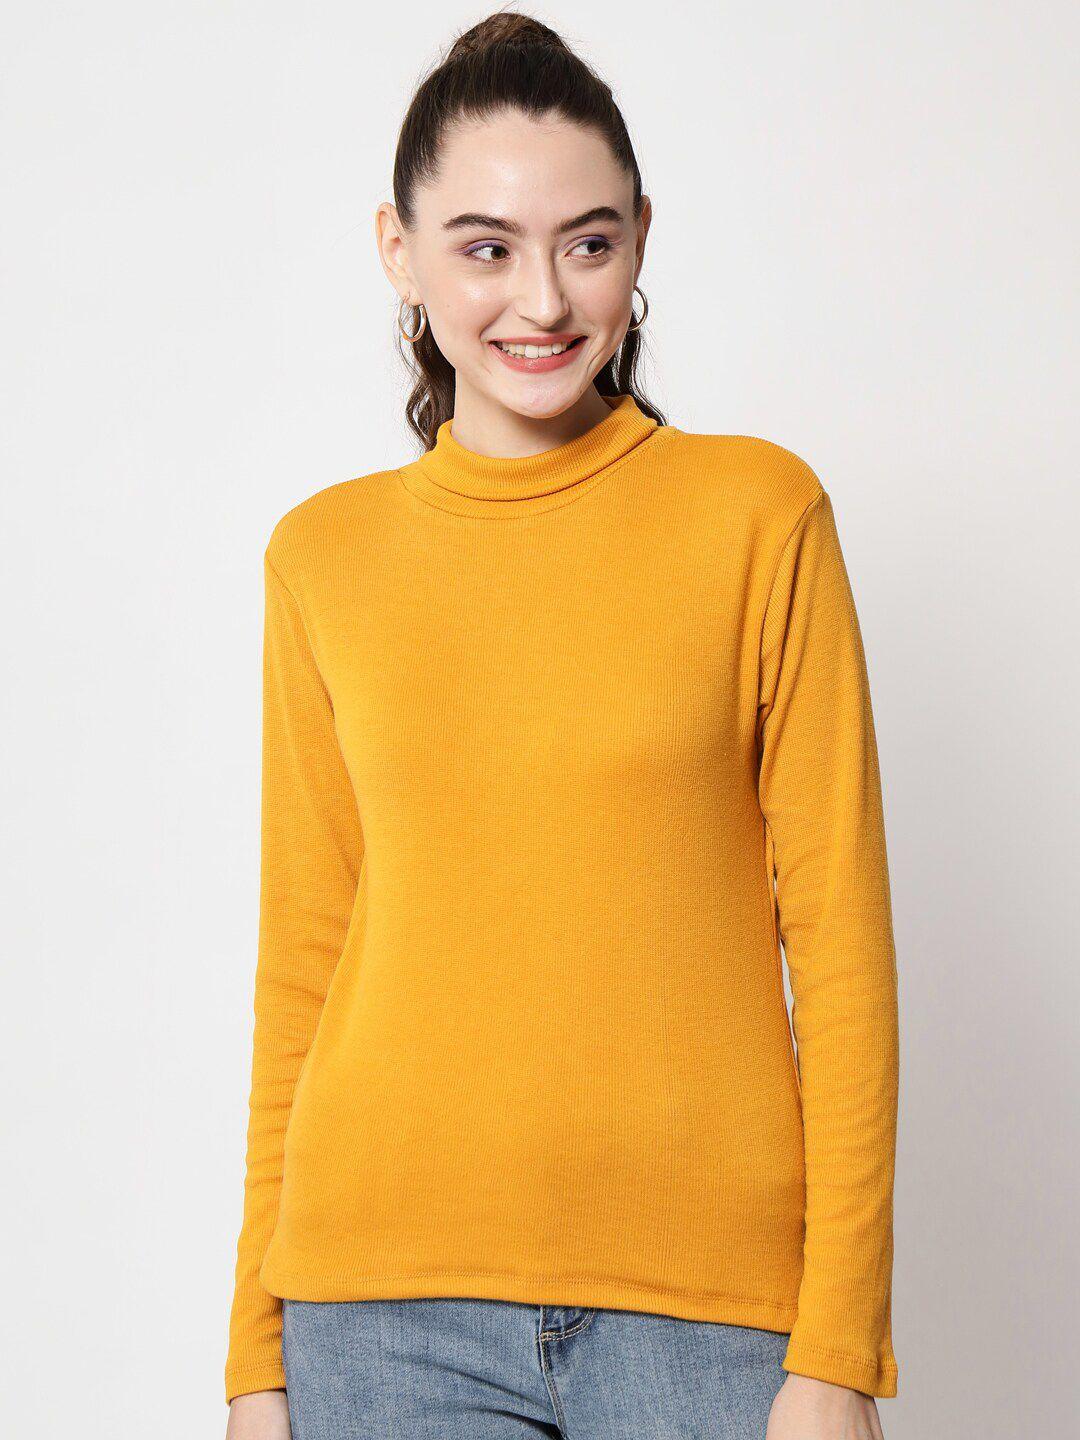 kushi flyer women mustard yellow solid high neck ribbed top